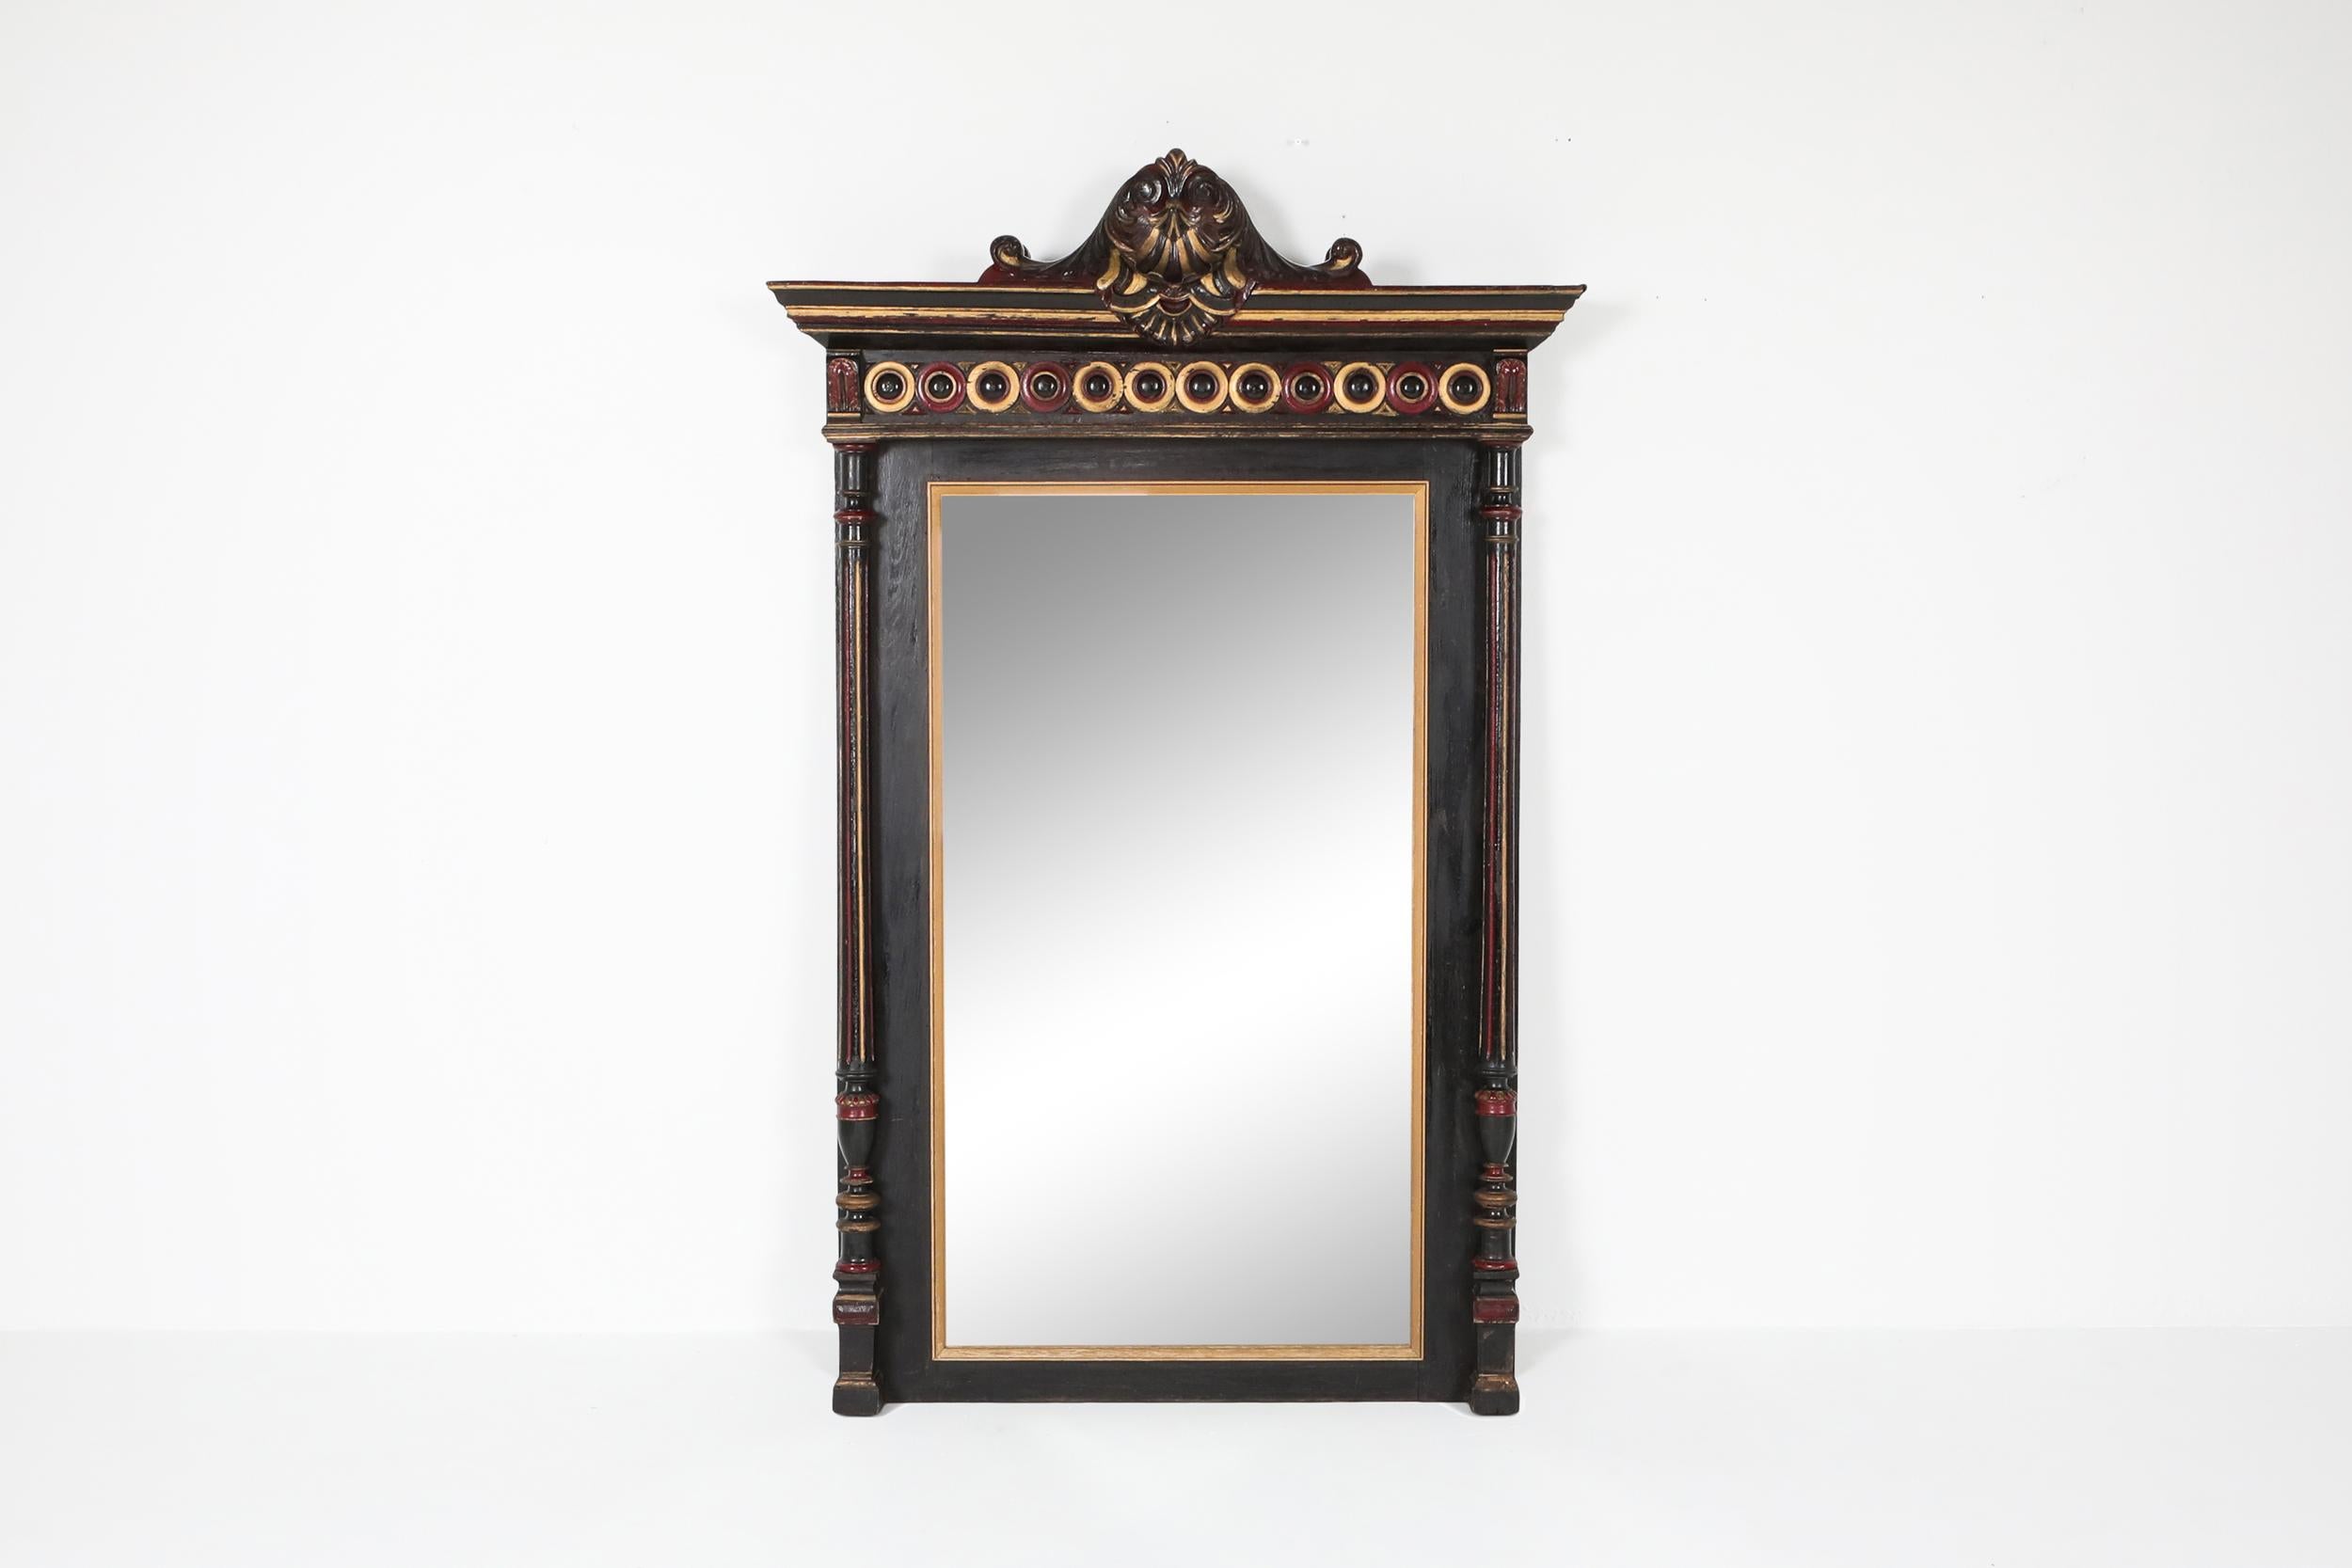 Mirror

This 19th century piece is hand carved and hand painted, showing stunning shapes and details. The color combination; black, gold and royal red give this piece an extraordinary rich appearance.